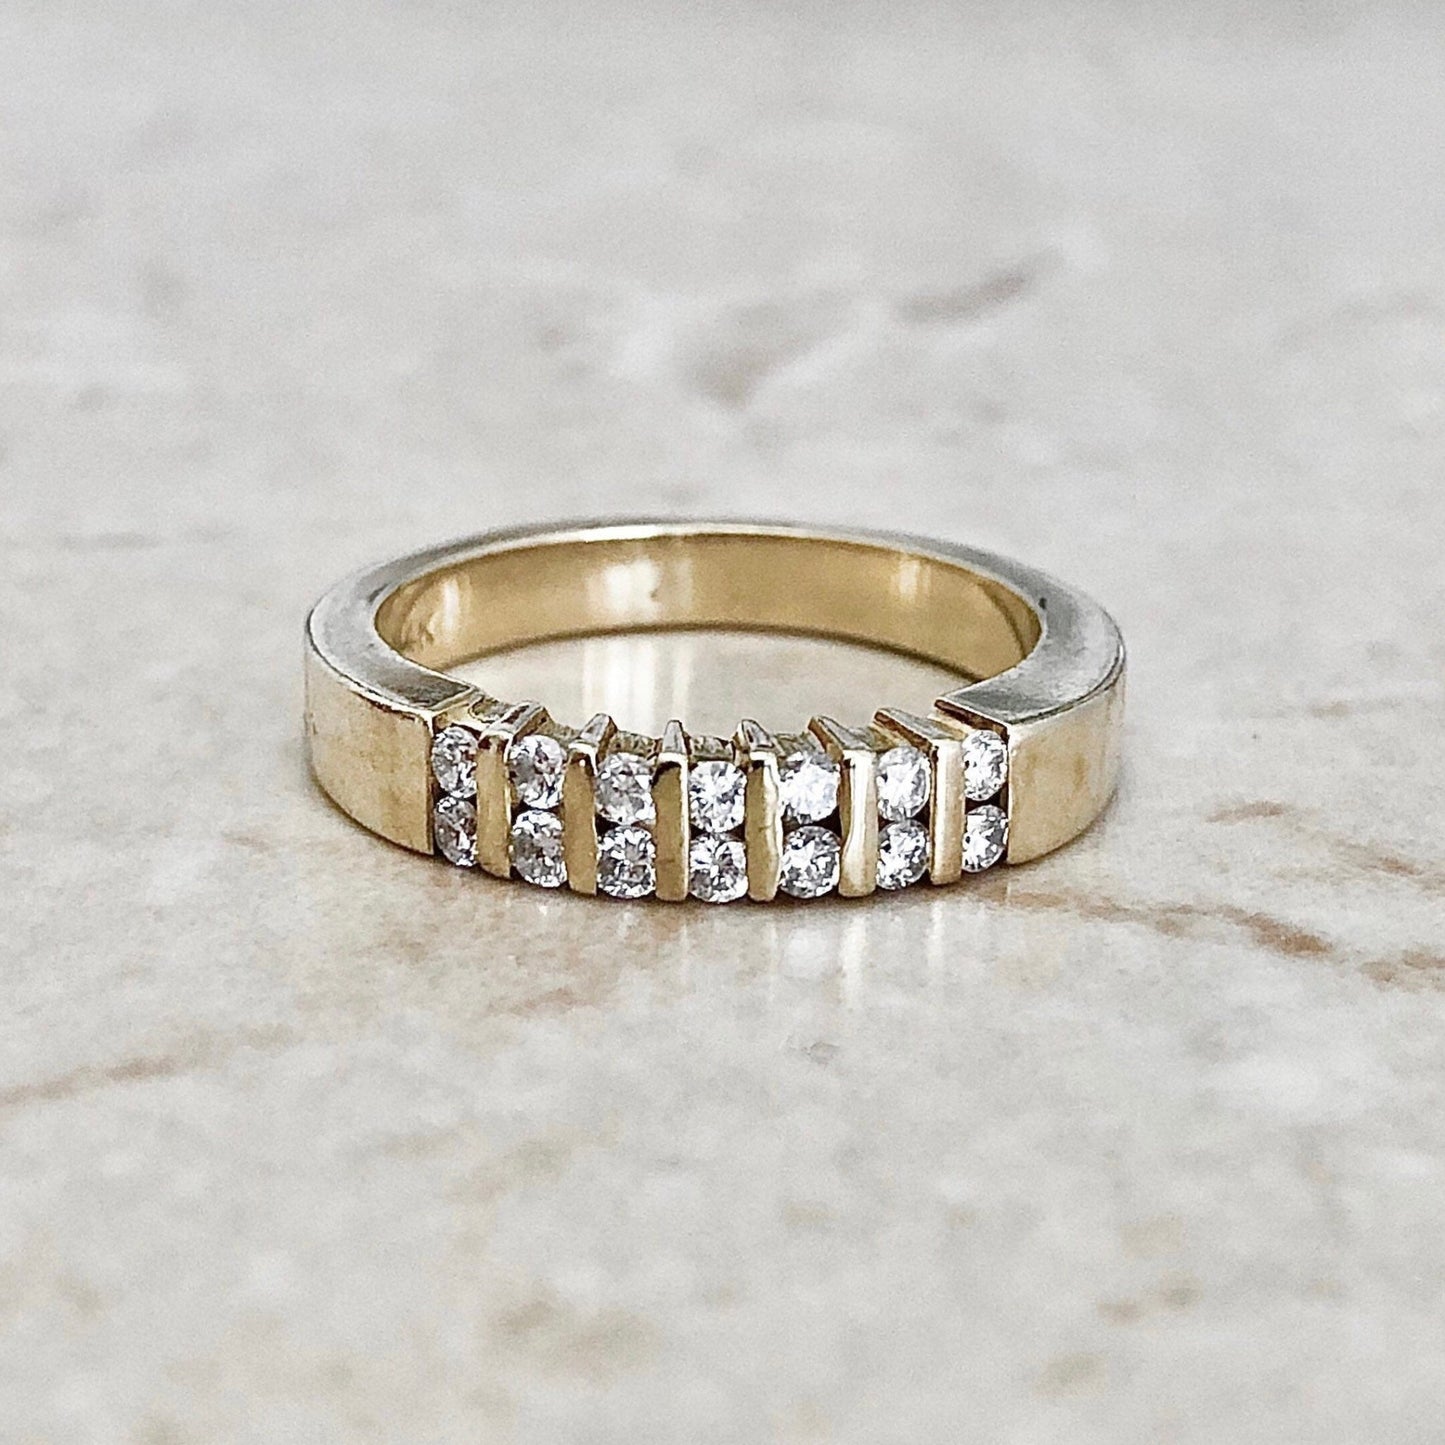 14K Double Row Diamond Band Ring - Yellow Gold Eternity Ring - Wedding Ring - Bridal Jewelry - Anniversary Ring - Best Gift For Her